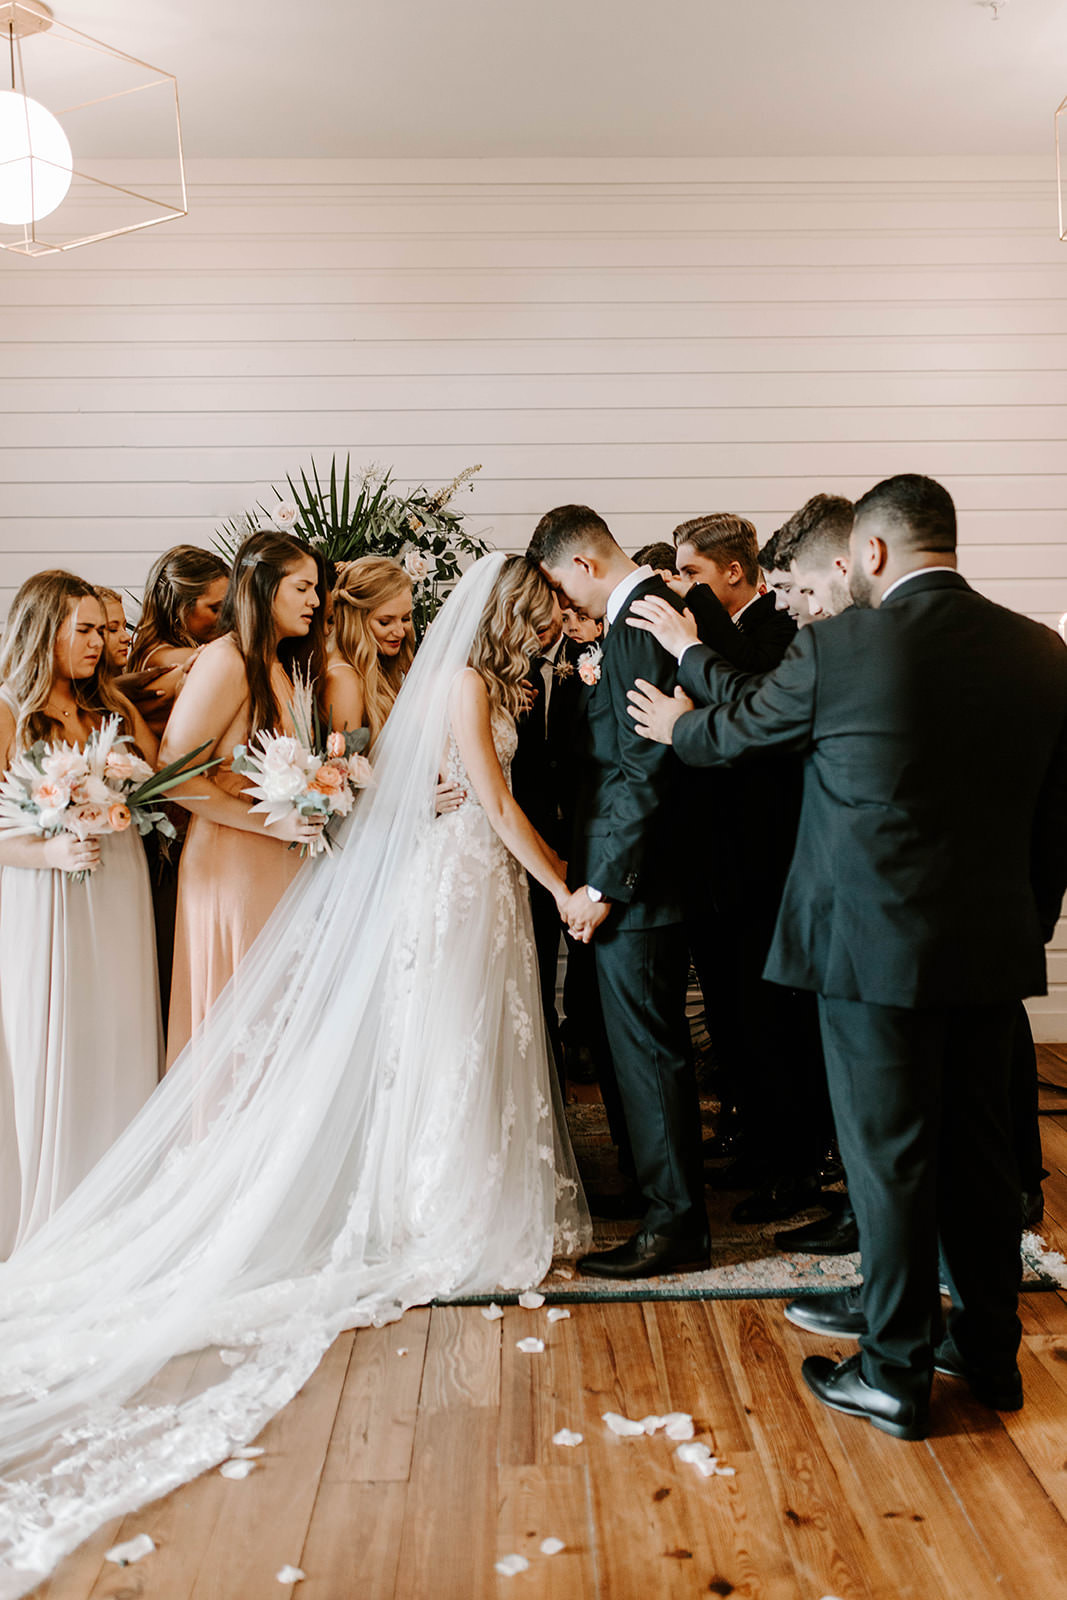 Boho Whimsical Bride and Groom Praying During Wedding Ceremony Portrait with Wedding Party | Tampa Bay Industrial Wedding Venue Armature Works